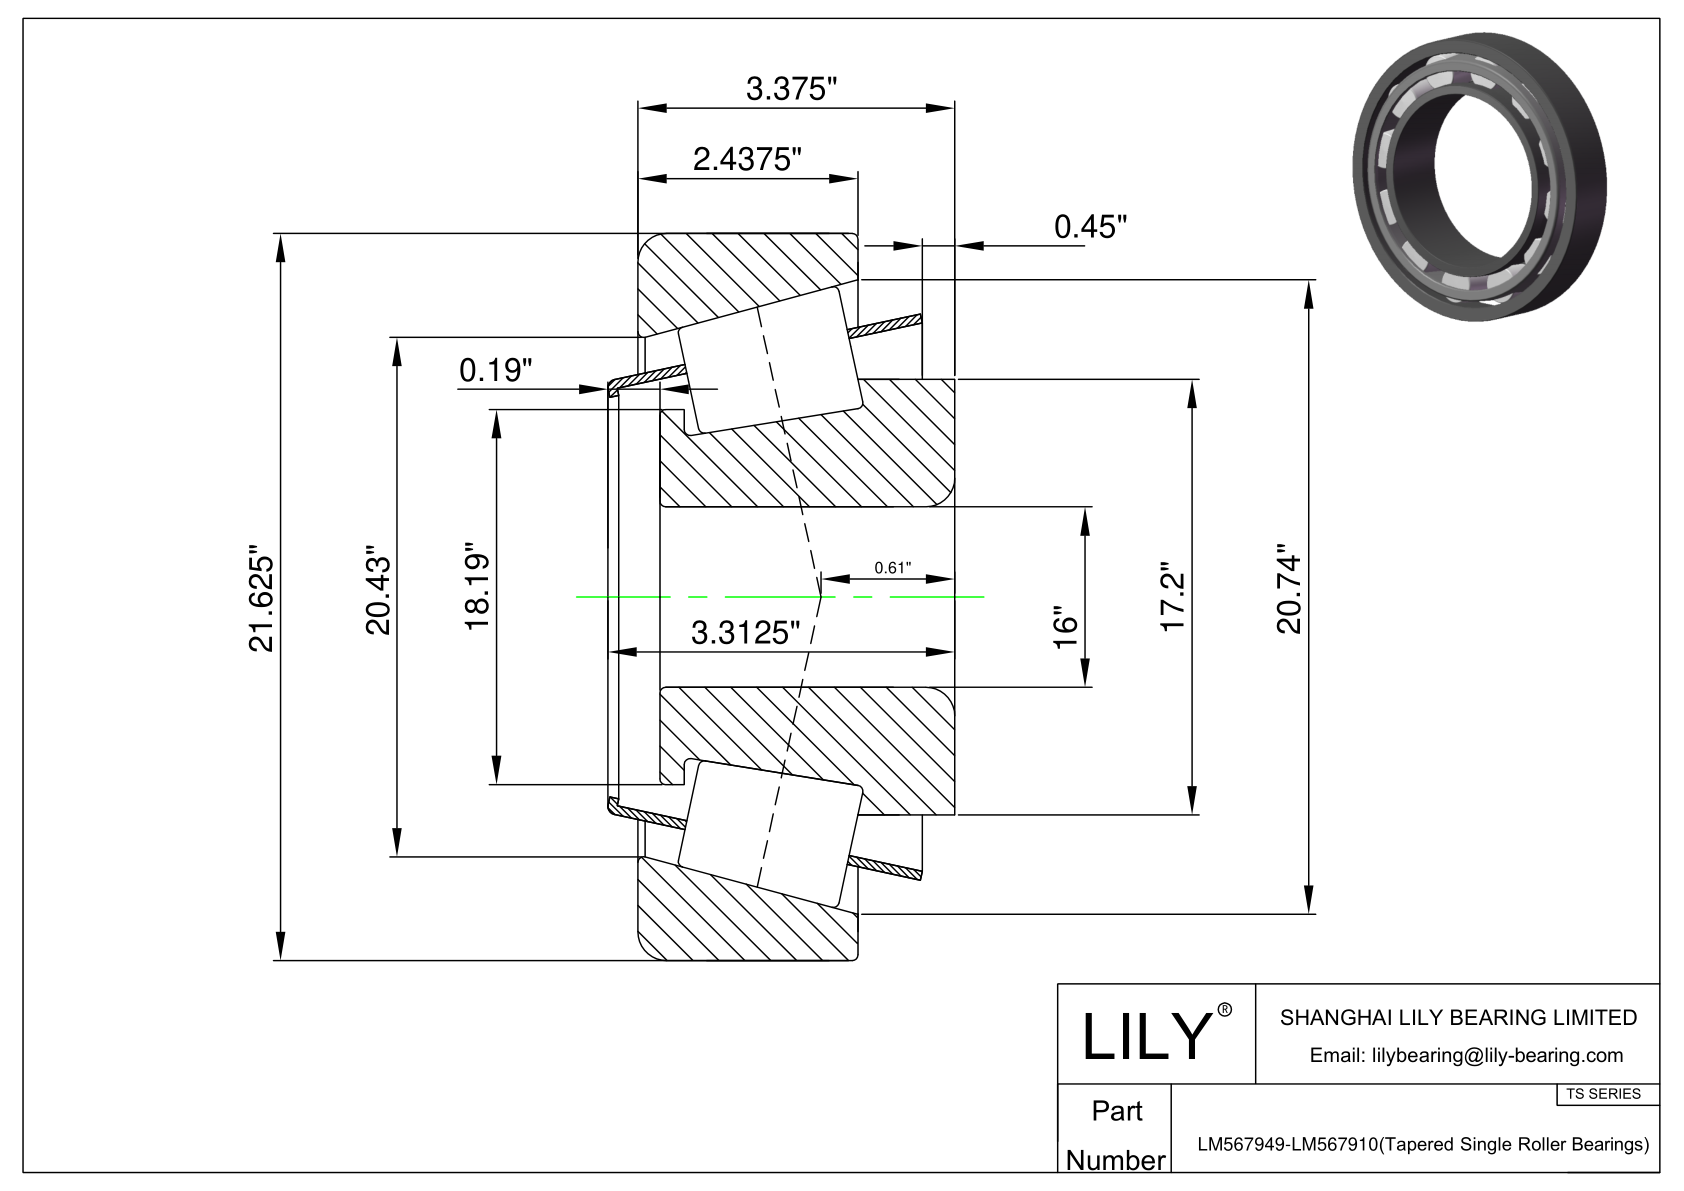 LM567949-LM567910 TS (Tapered Single Roller Bearings) (Imperial) cad drawing